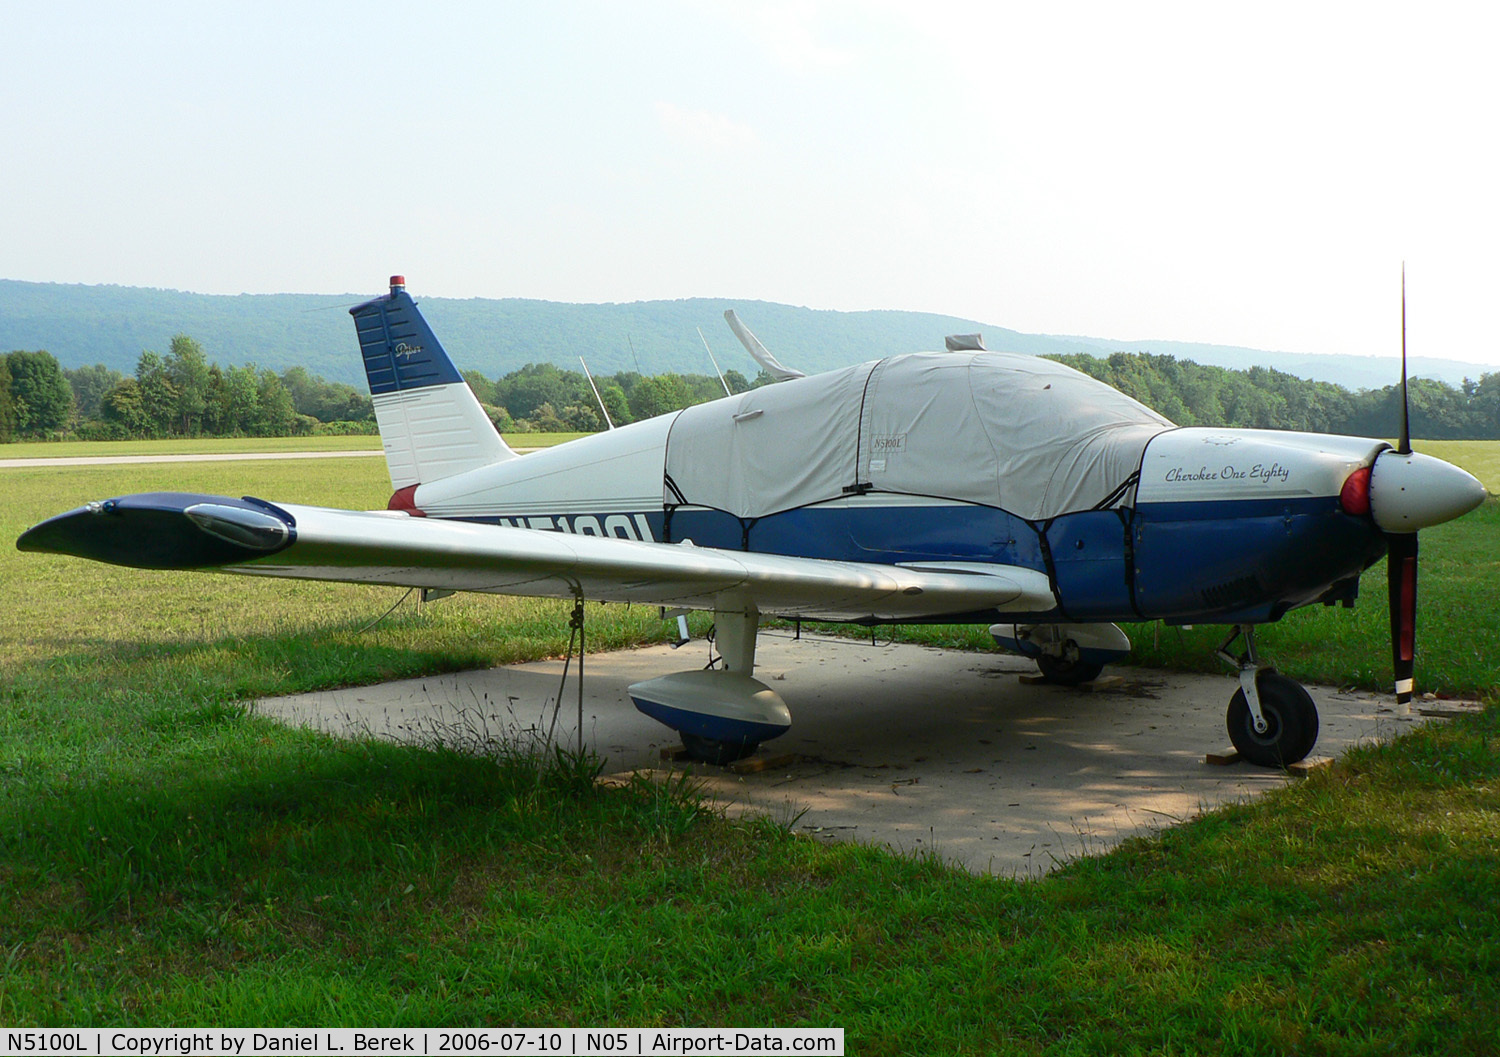 N5100L, 1967 Piper PA-28-180 C/N 28-4372, Blue 1967 Cherokee Archer One-eighty amid the green surroundings of Hackettstown, NJ.